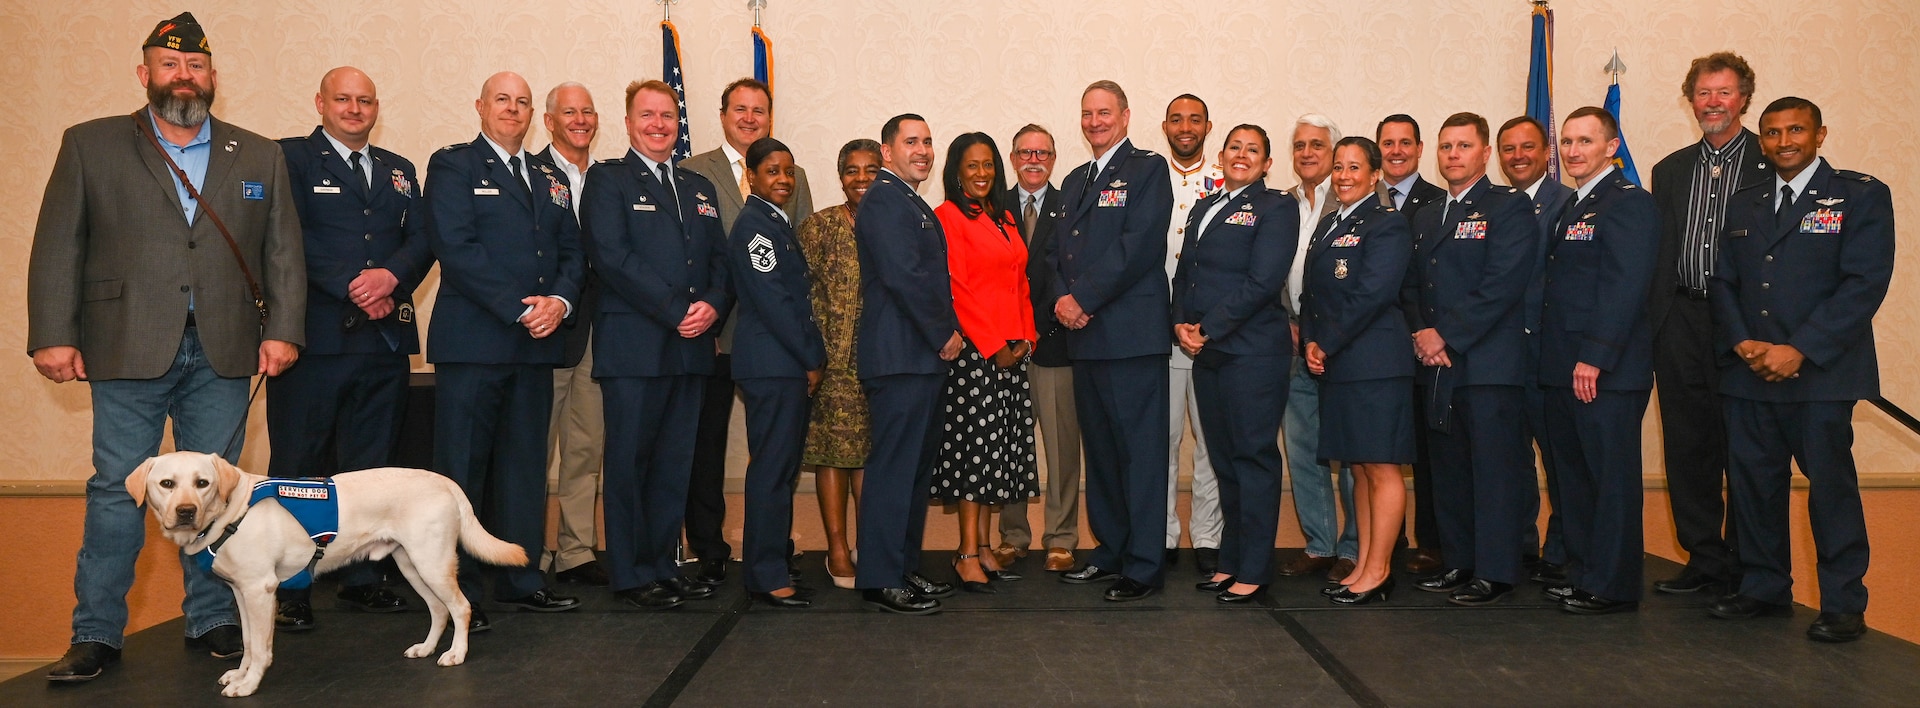 433rd Airlift Wing and 960th Cyberspace Wing military leaders and civilian Honorary Commanders stand for a photograph after the 2022 Honorary Commanders’ induction ceremony in San Antonio, April 2, 2022. The intent of the 433rd AW Honorary Commanders Program is to foster friendship between local and military communities. (U.S. Air Force photo by Airman 1st Class Mark Colmenares)